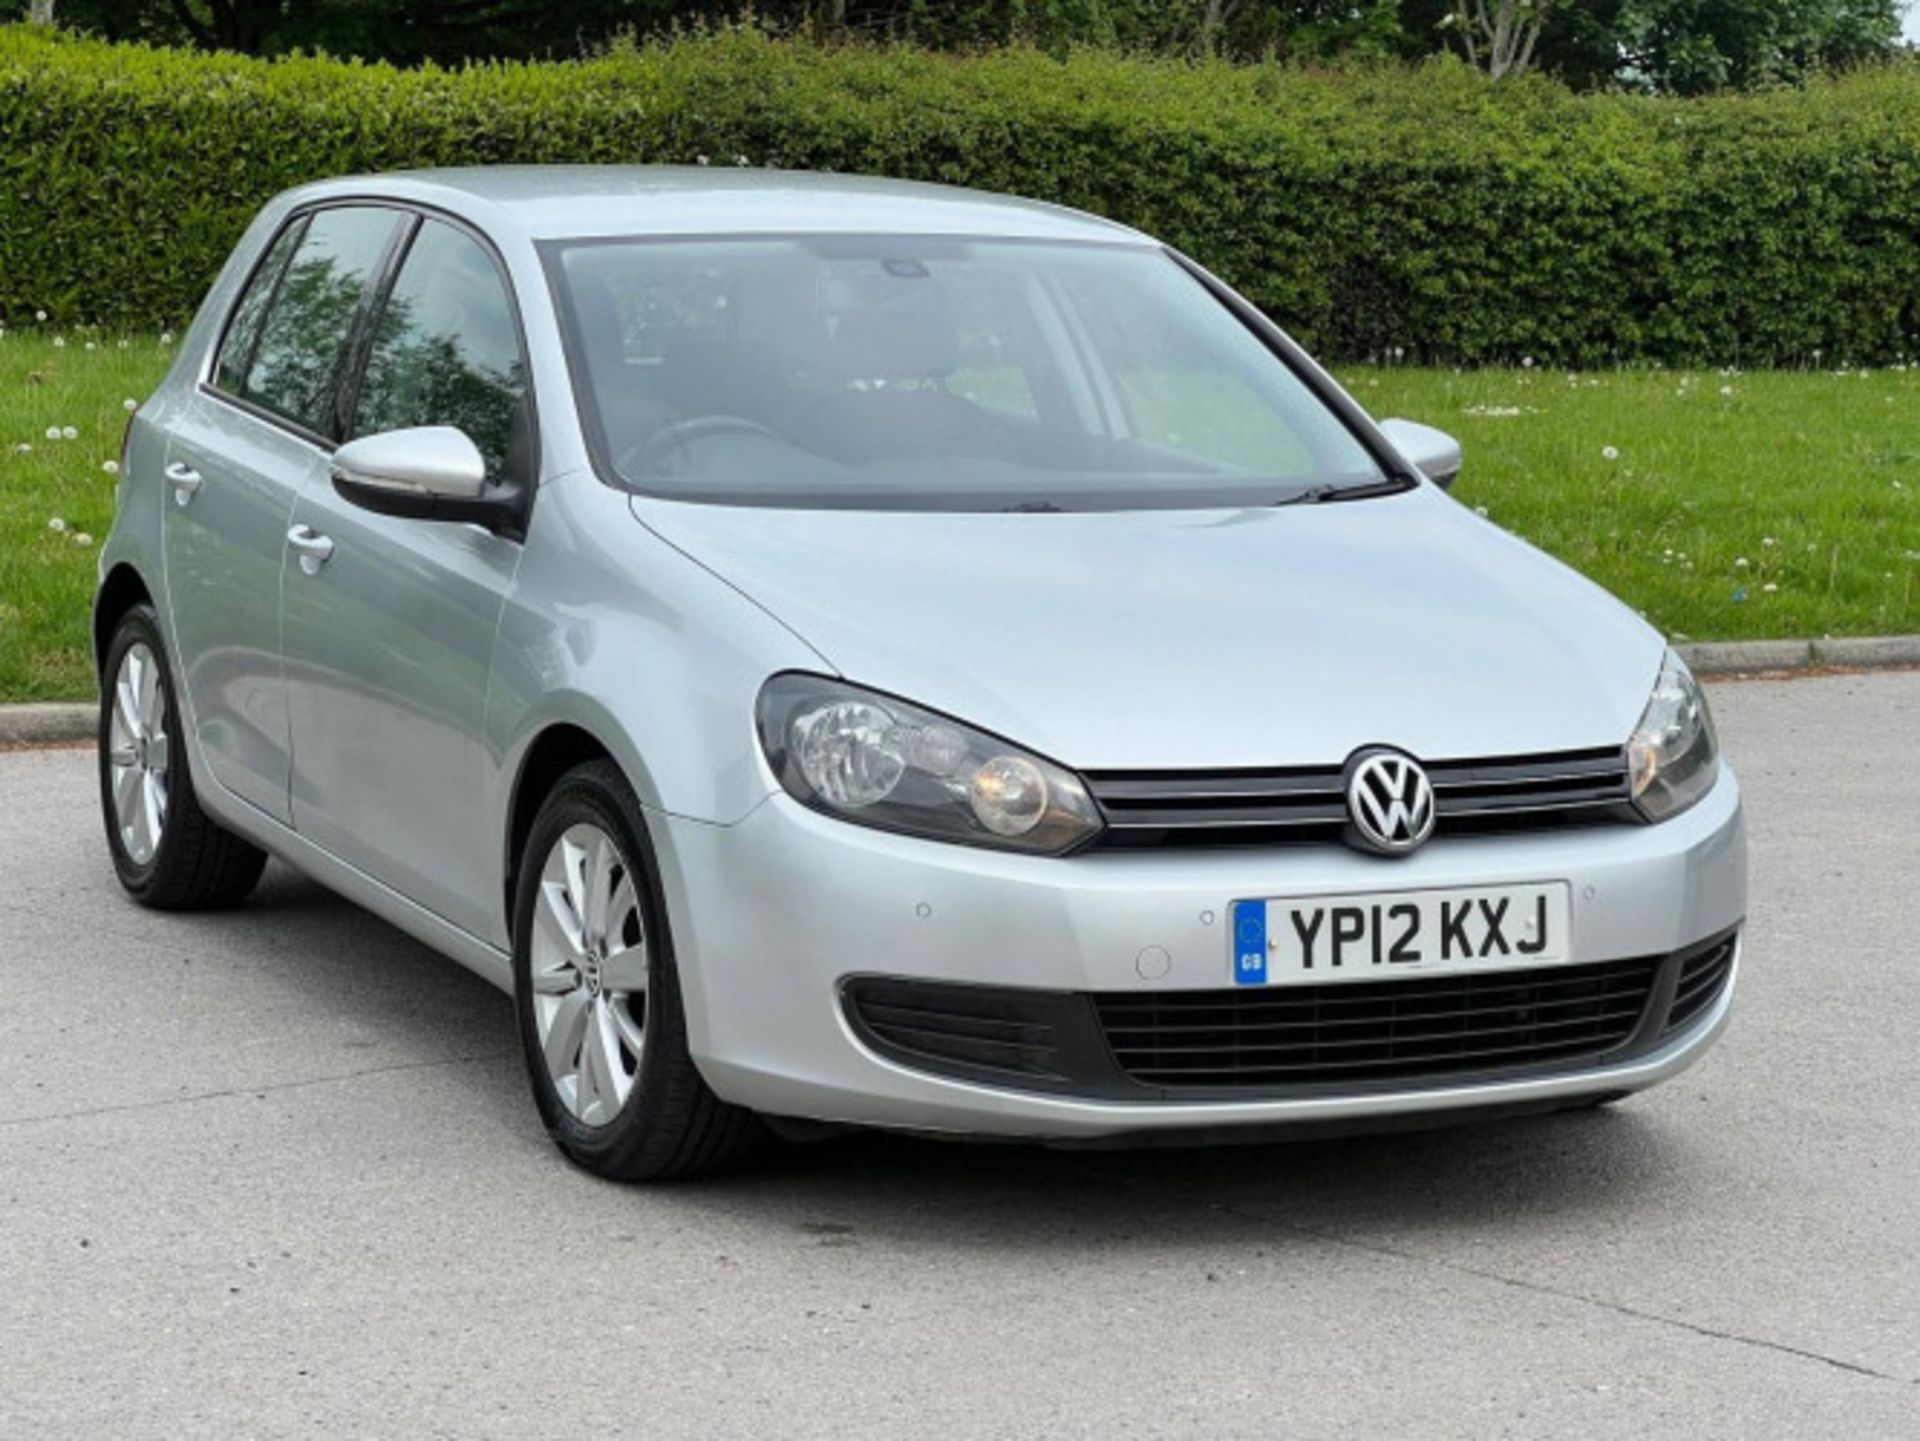 IMPECCABLE 2012 VOLKSWAGEN GOLF 1.6 TDI MATCH >>--NO VAT ON HAMMER--<< - Image 10 of 116